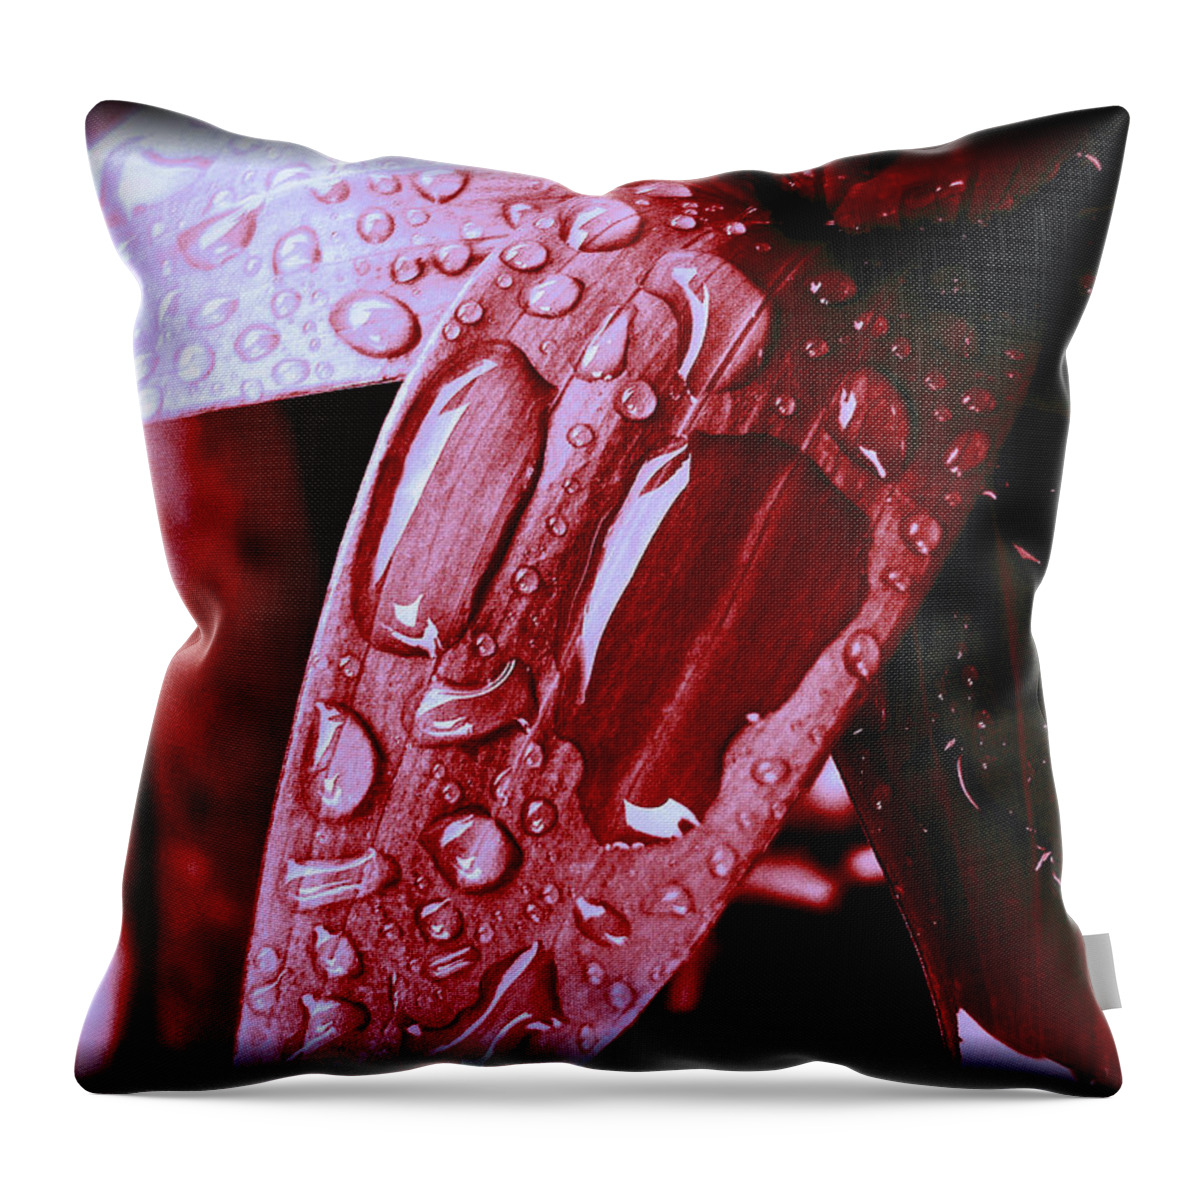  Throw Pillow featuring the digital art Leaf 6 2020 Master by The Lovelock experience